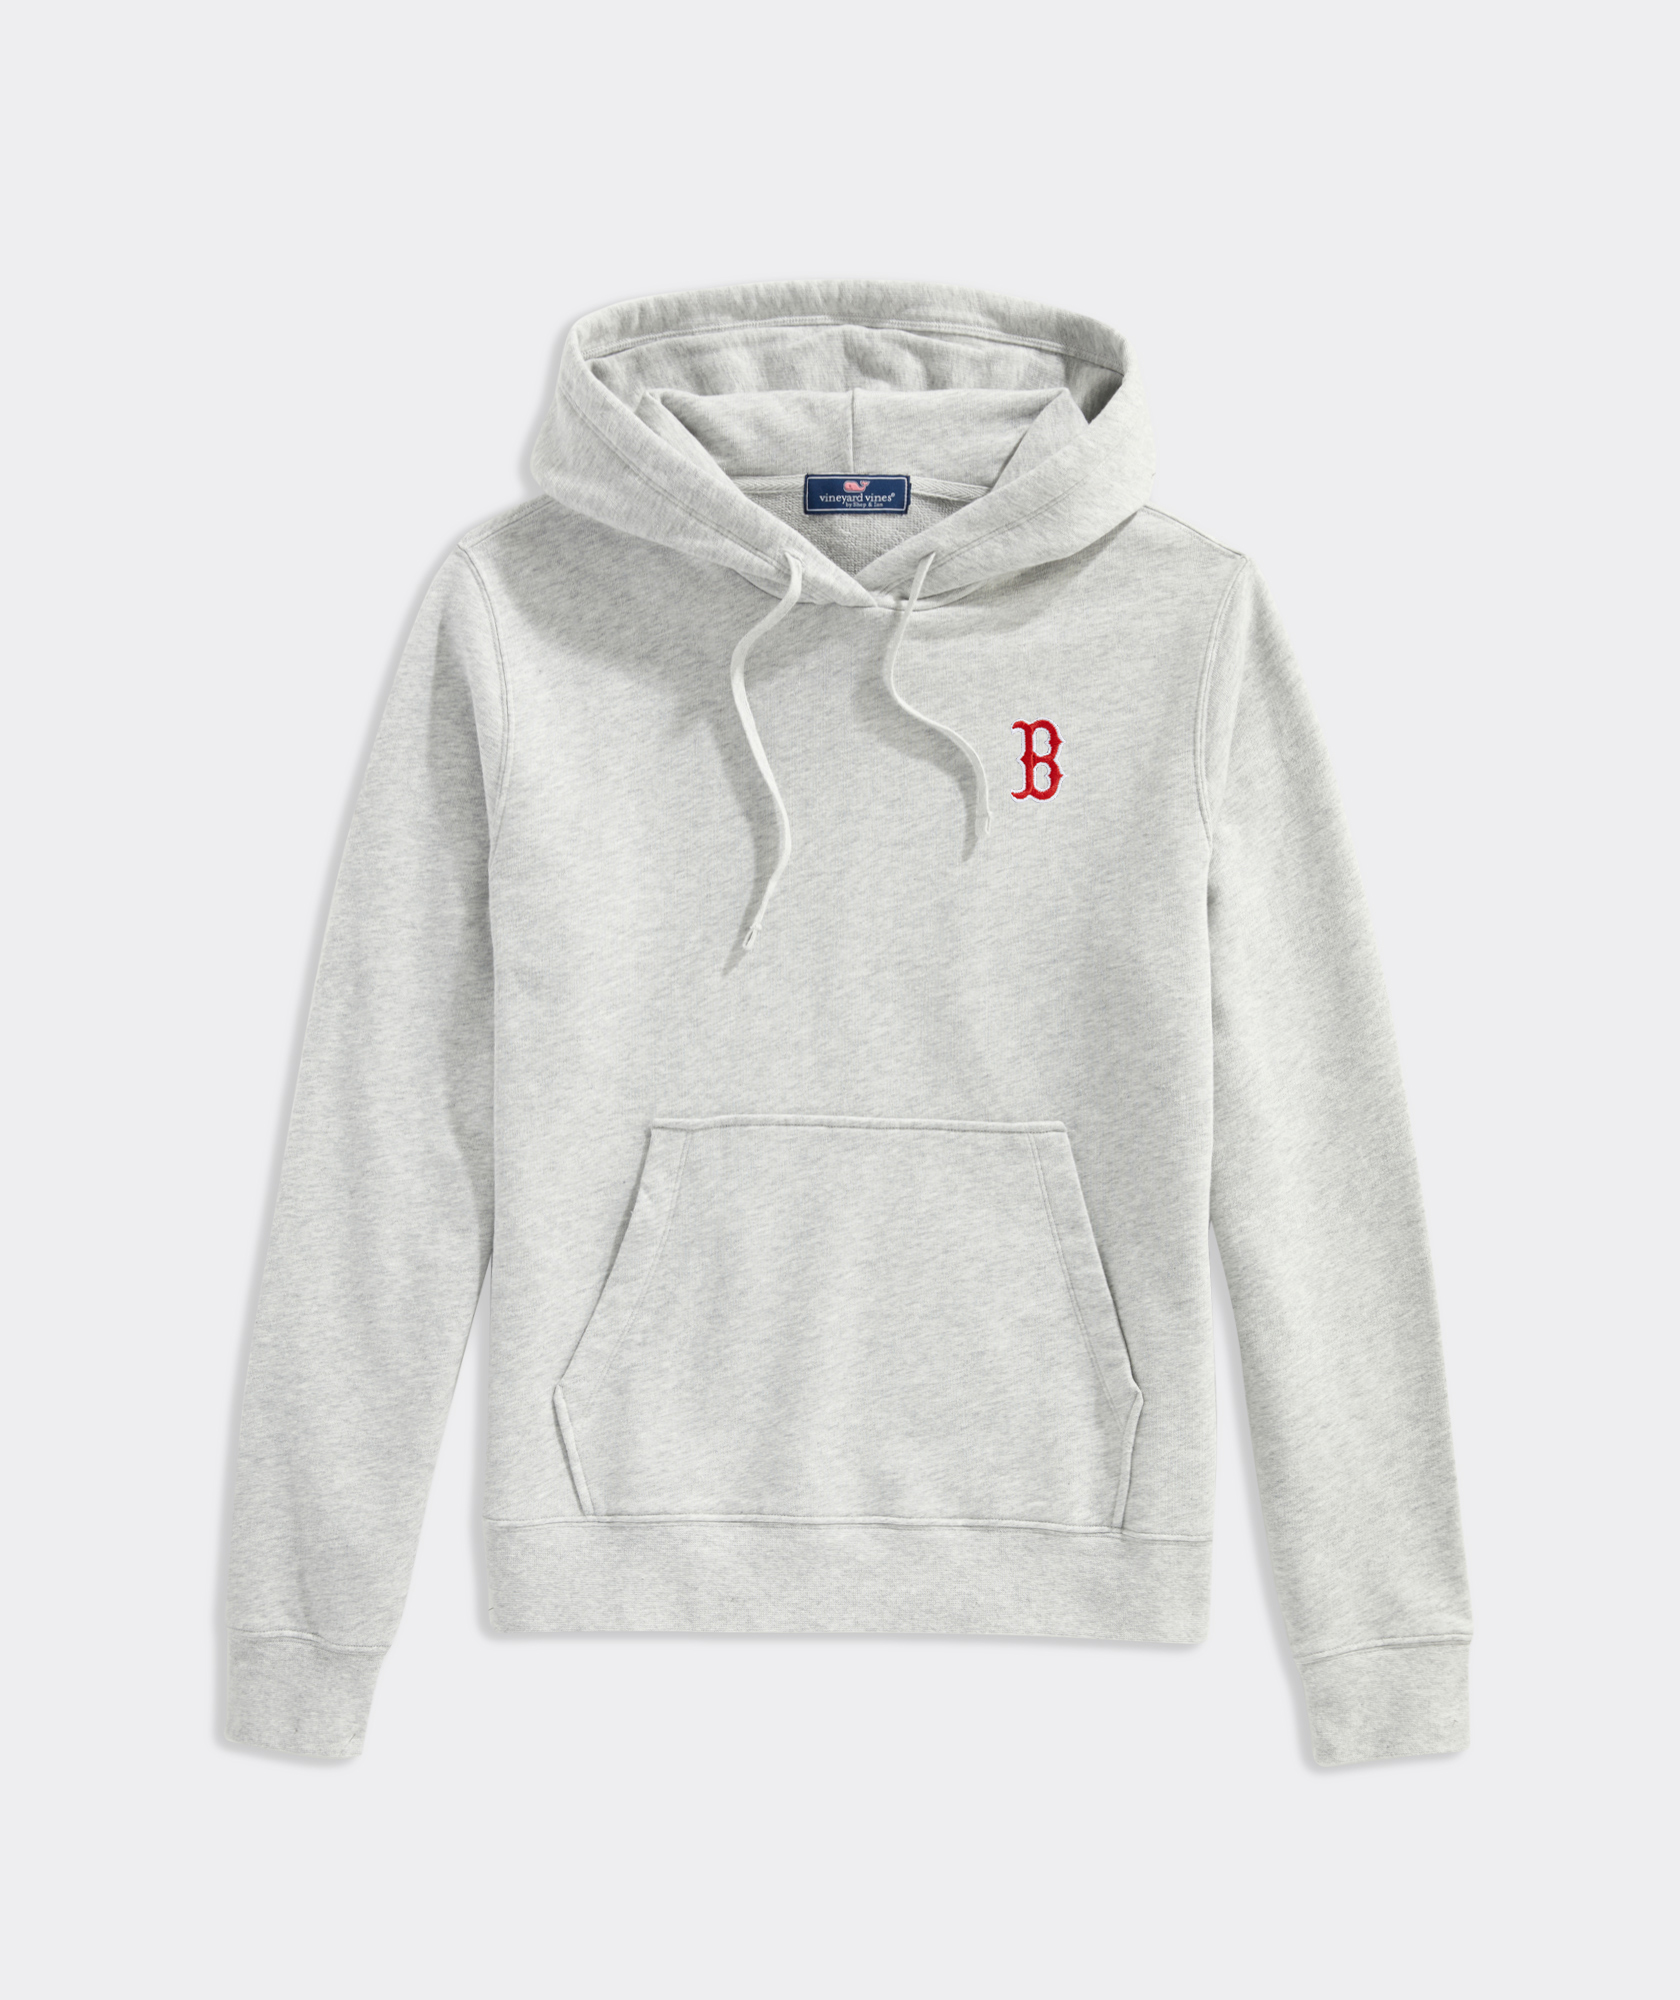 Boston Red Sox Vineyard Vines Every Day Should Feel This Good